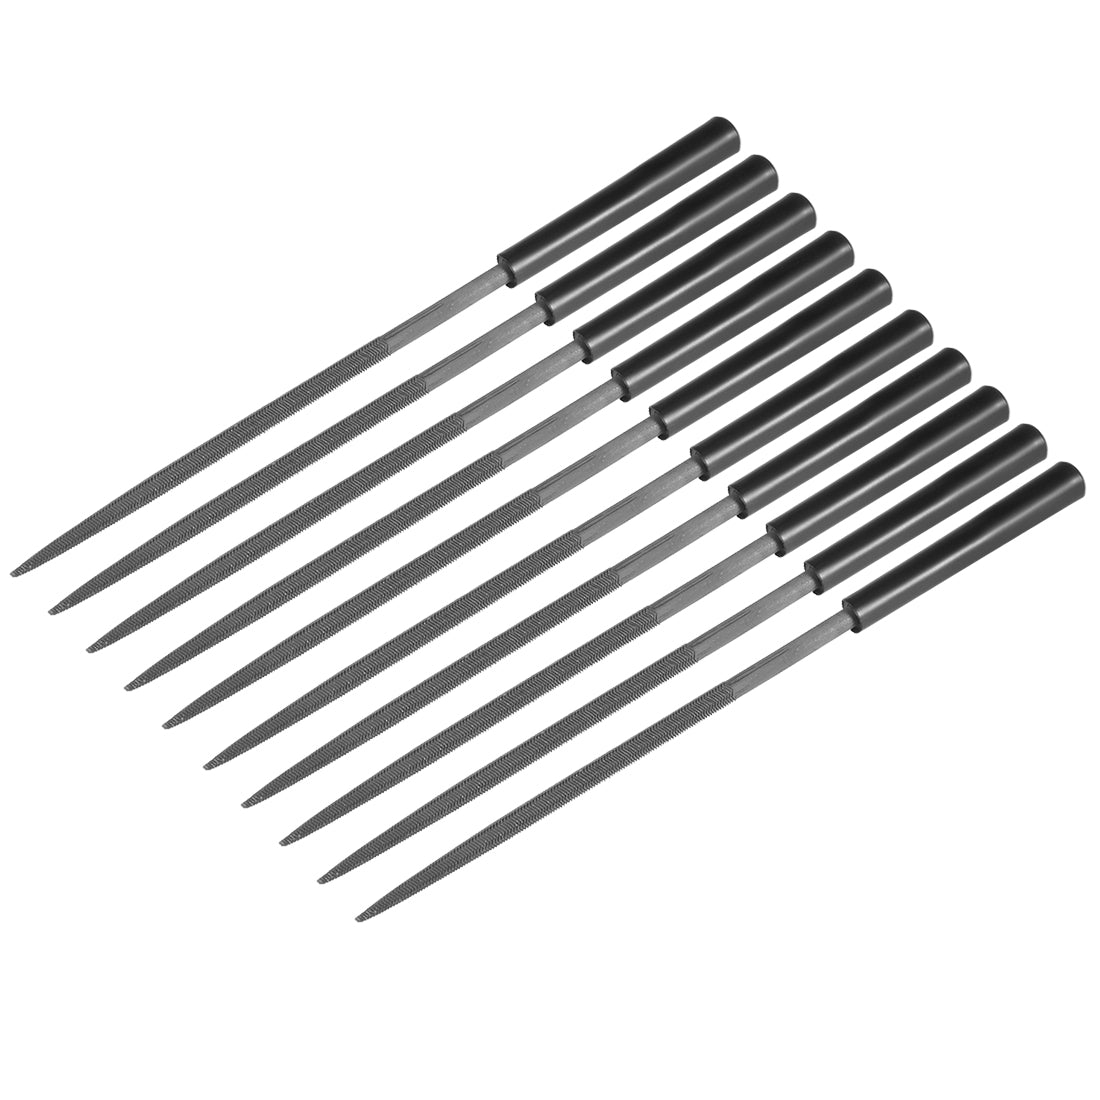 uxcell Uxcell 10Pcs Second Cut Steel Round Needle File with Plastic Handle, 4mm x 160mm